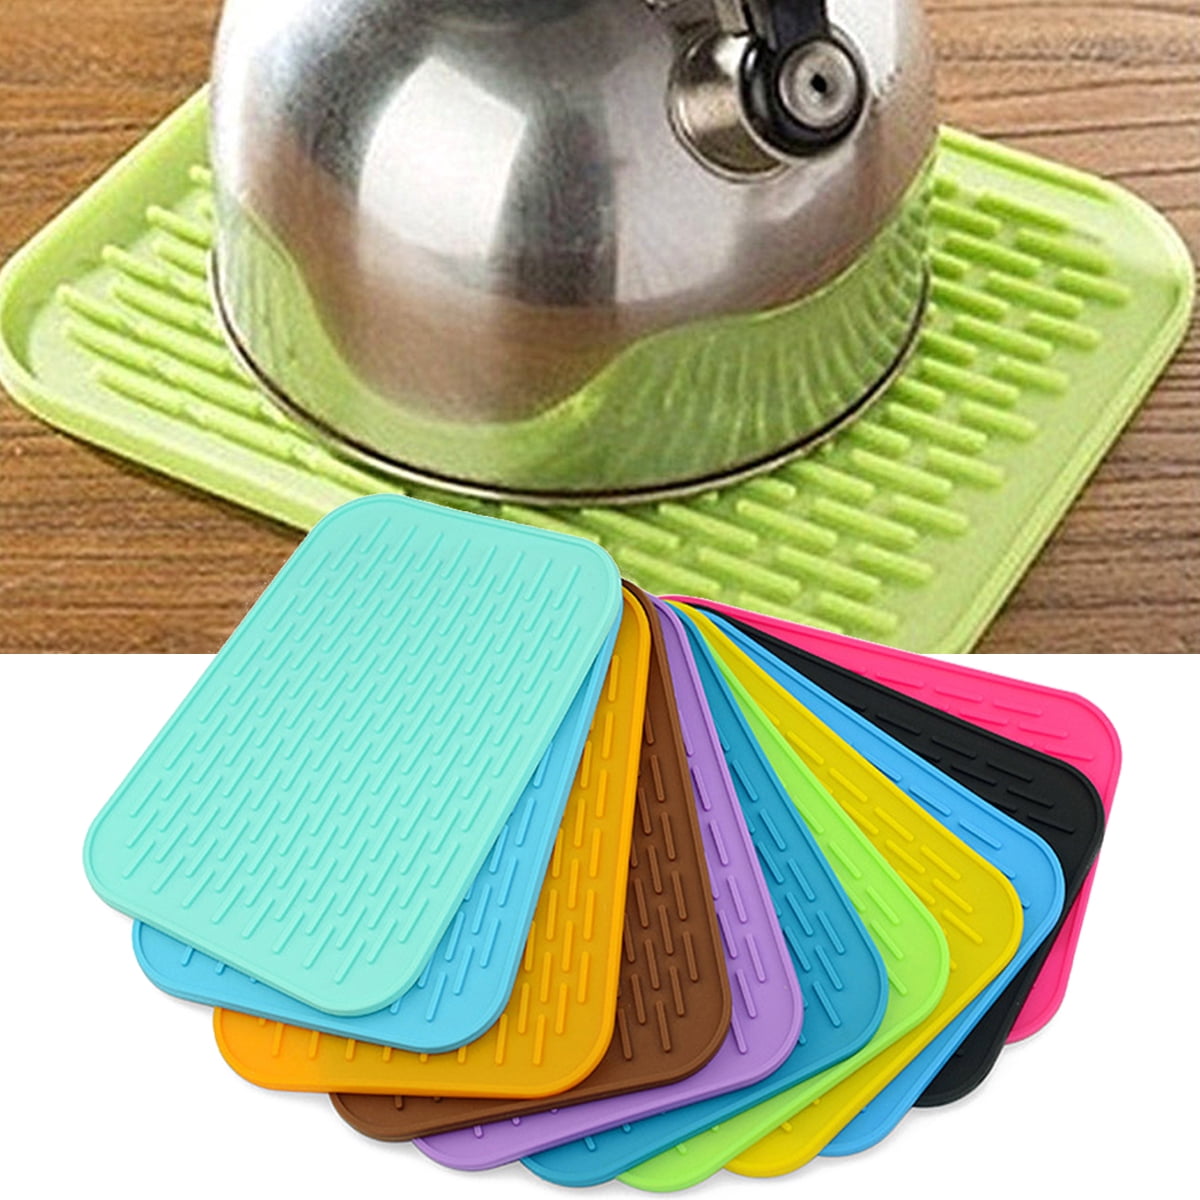 Travelwant Silicone Dish Drying Mat -Large Flexible Rubber Drying